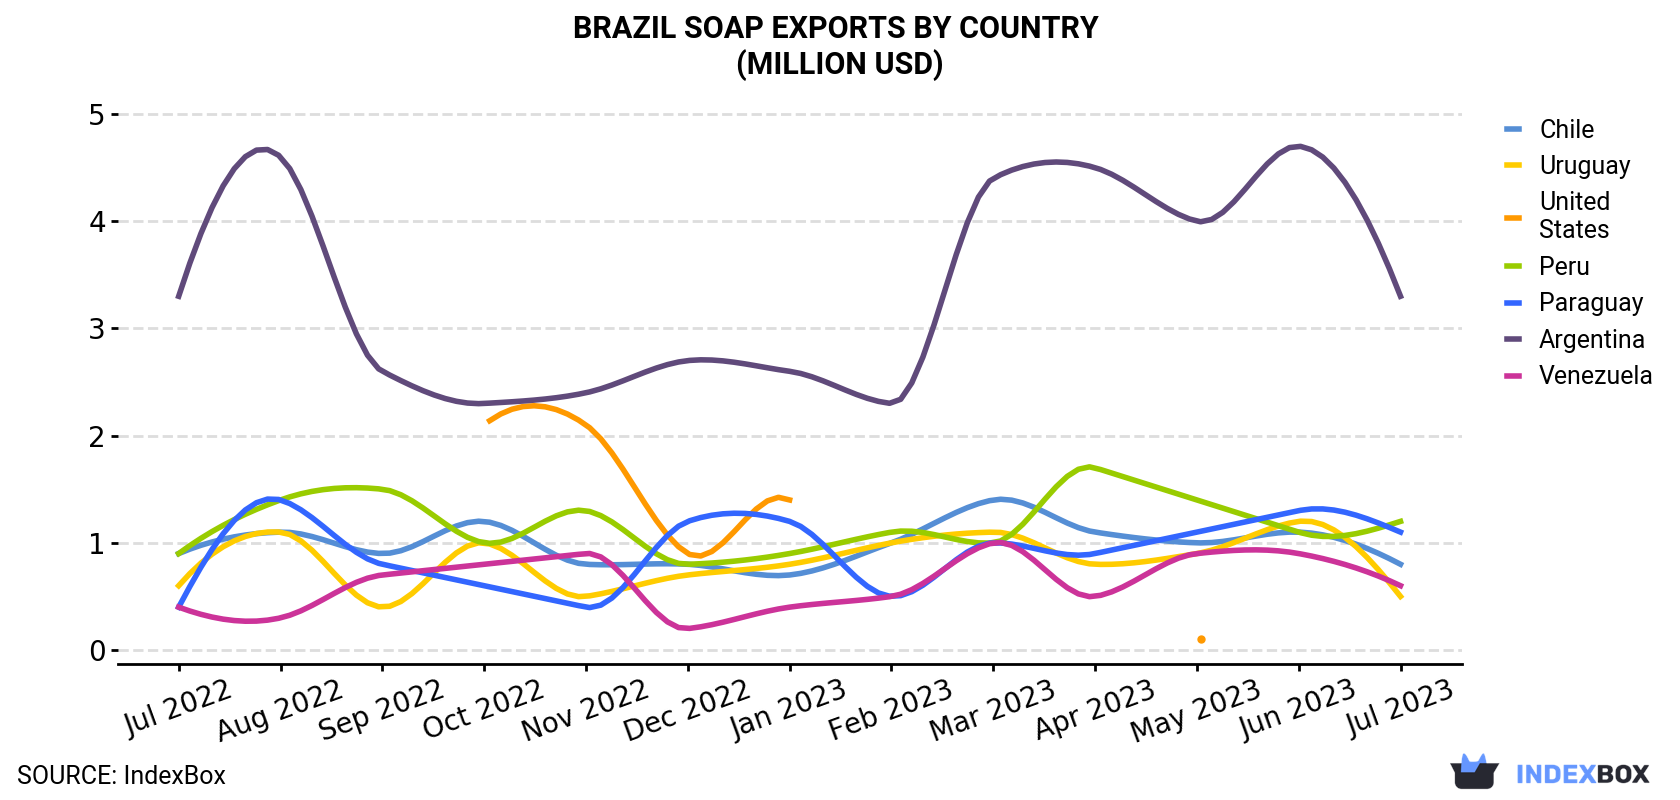 Brazil Soap Exports By Country (Million USD)